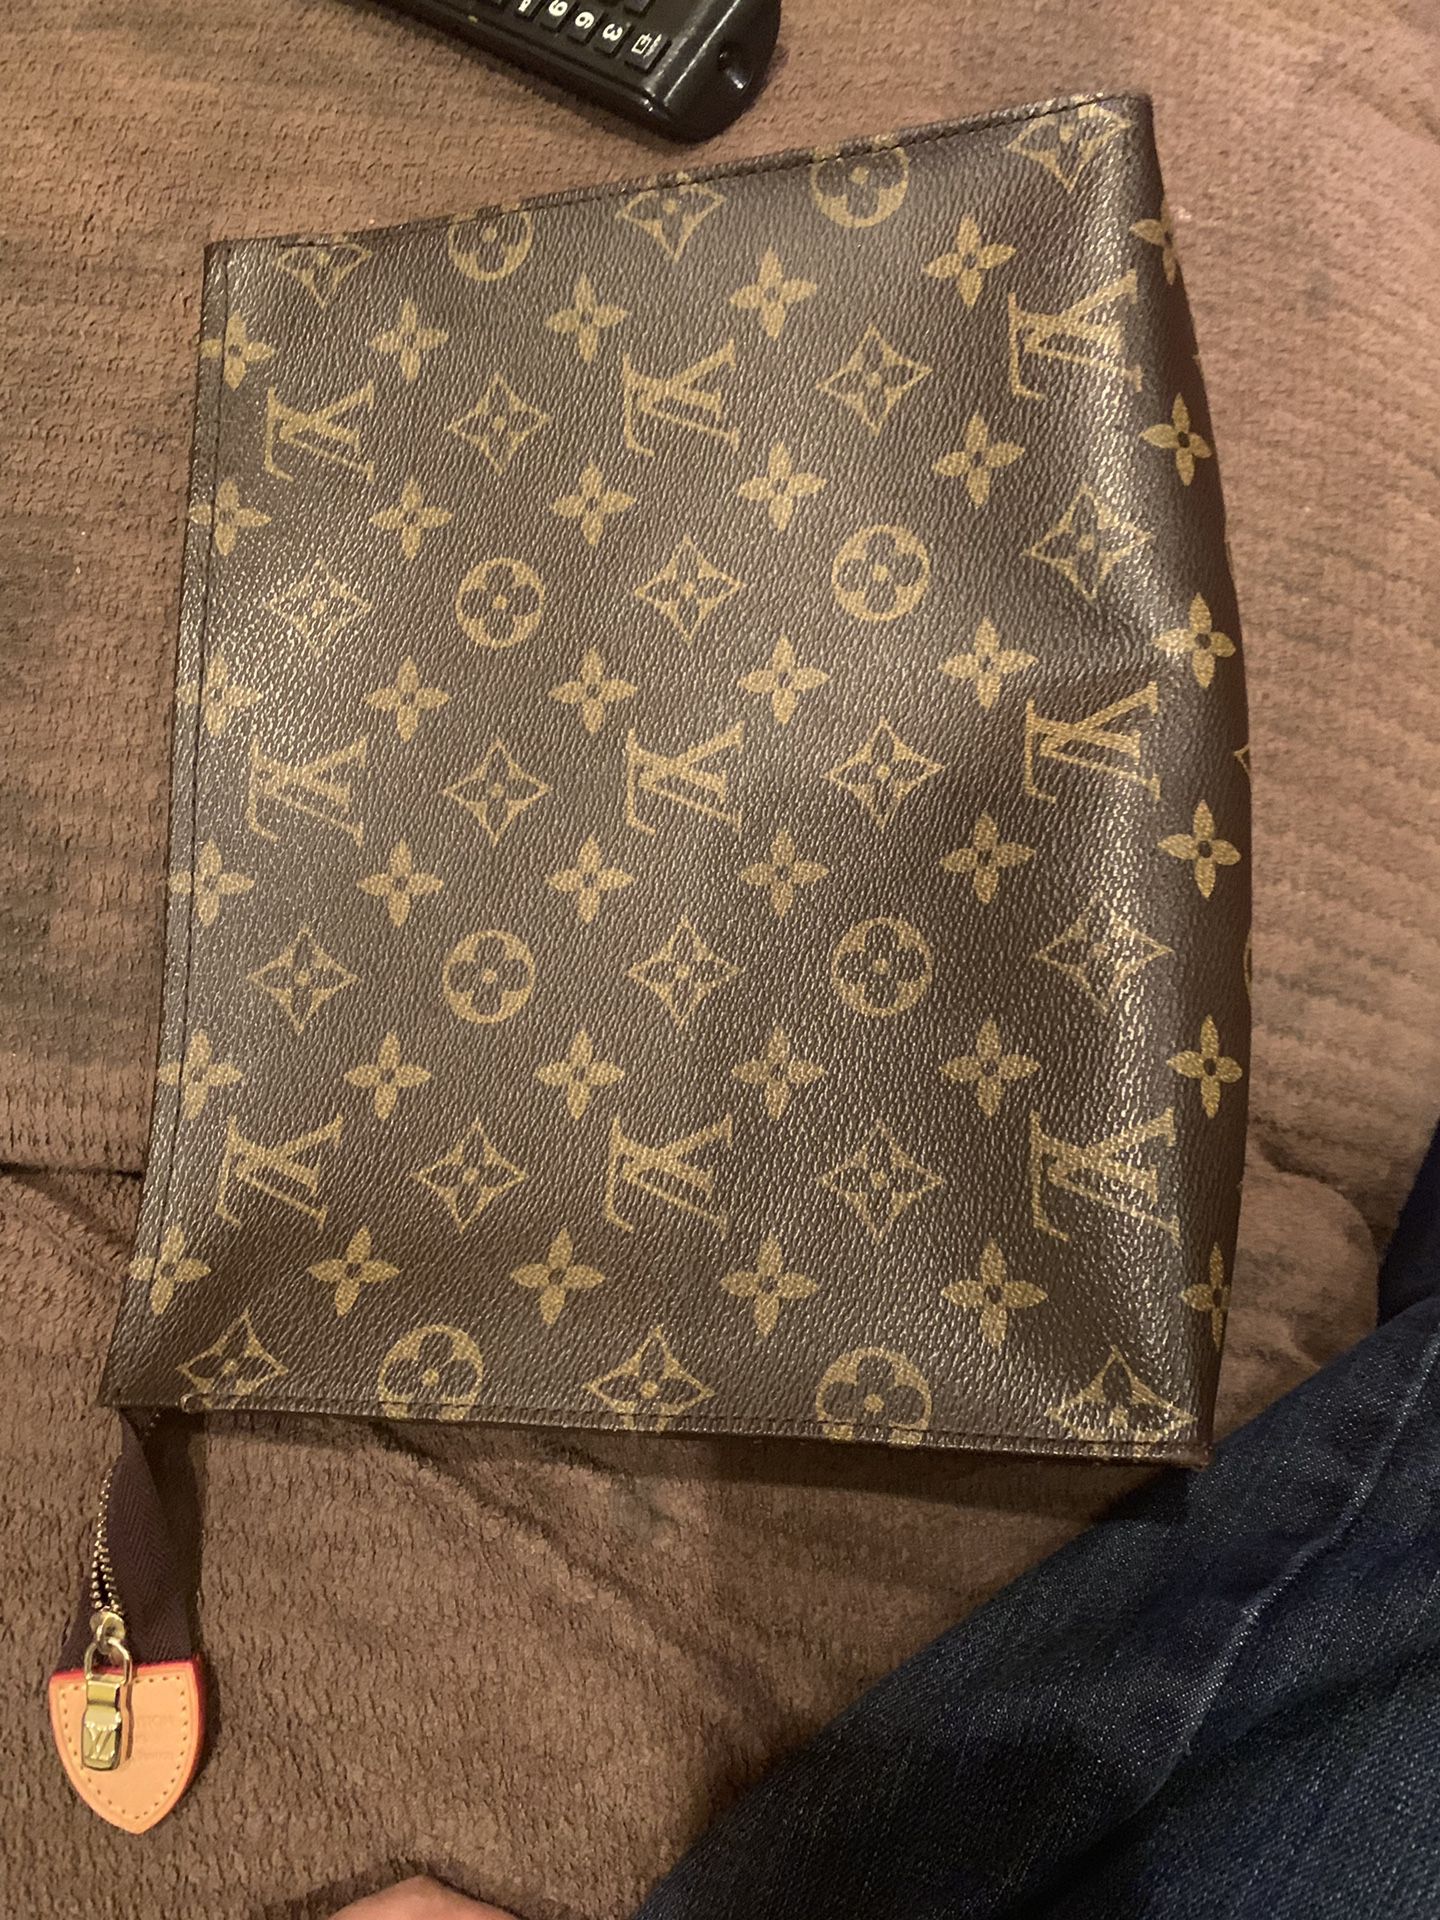 Pin by 𝑎𝑛𝑎 on accessories  Louis vuitton makeup bag, Louis